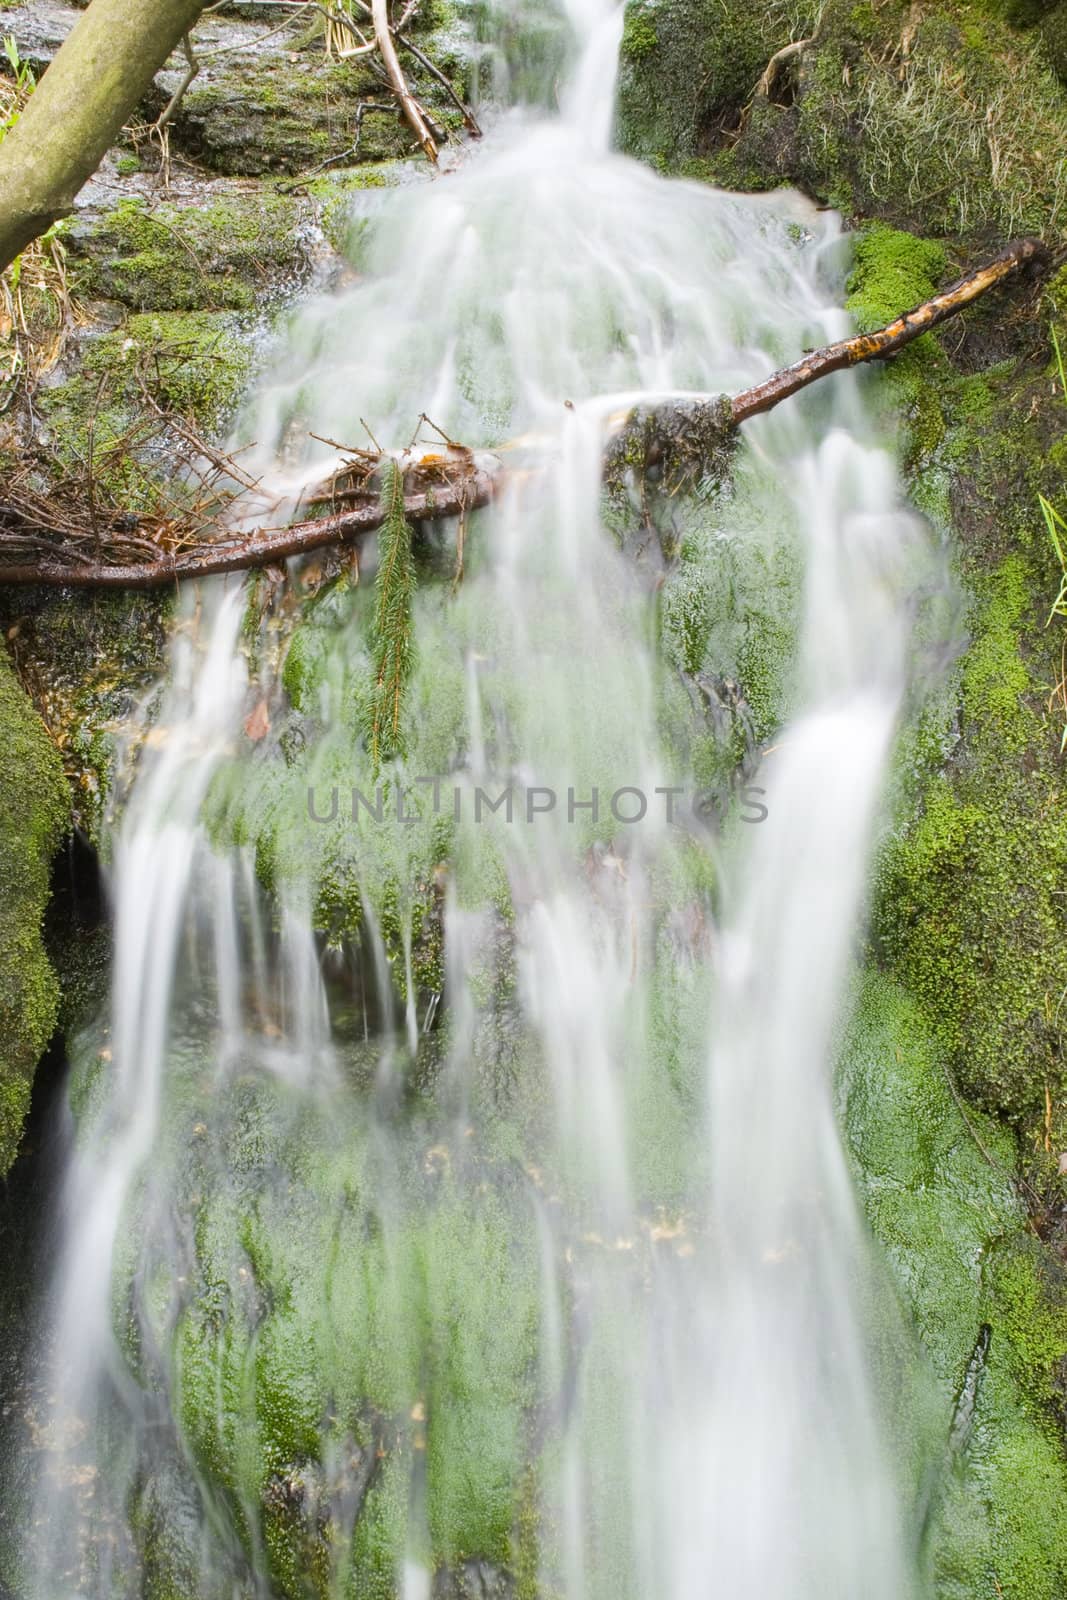 Stream in the Green by werg